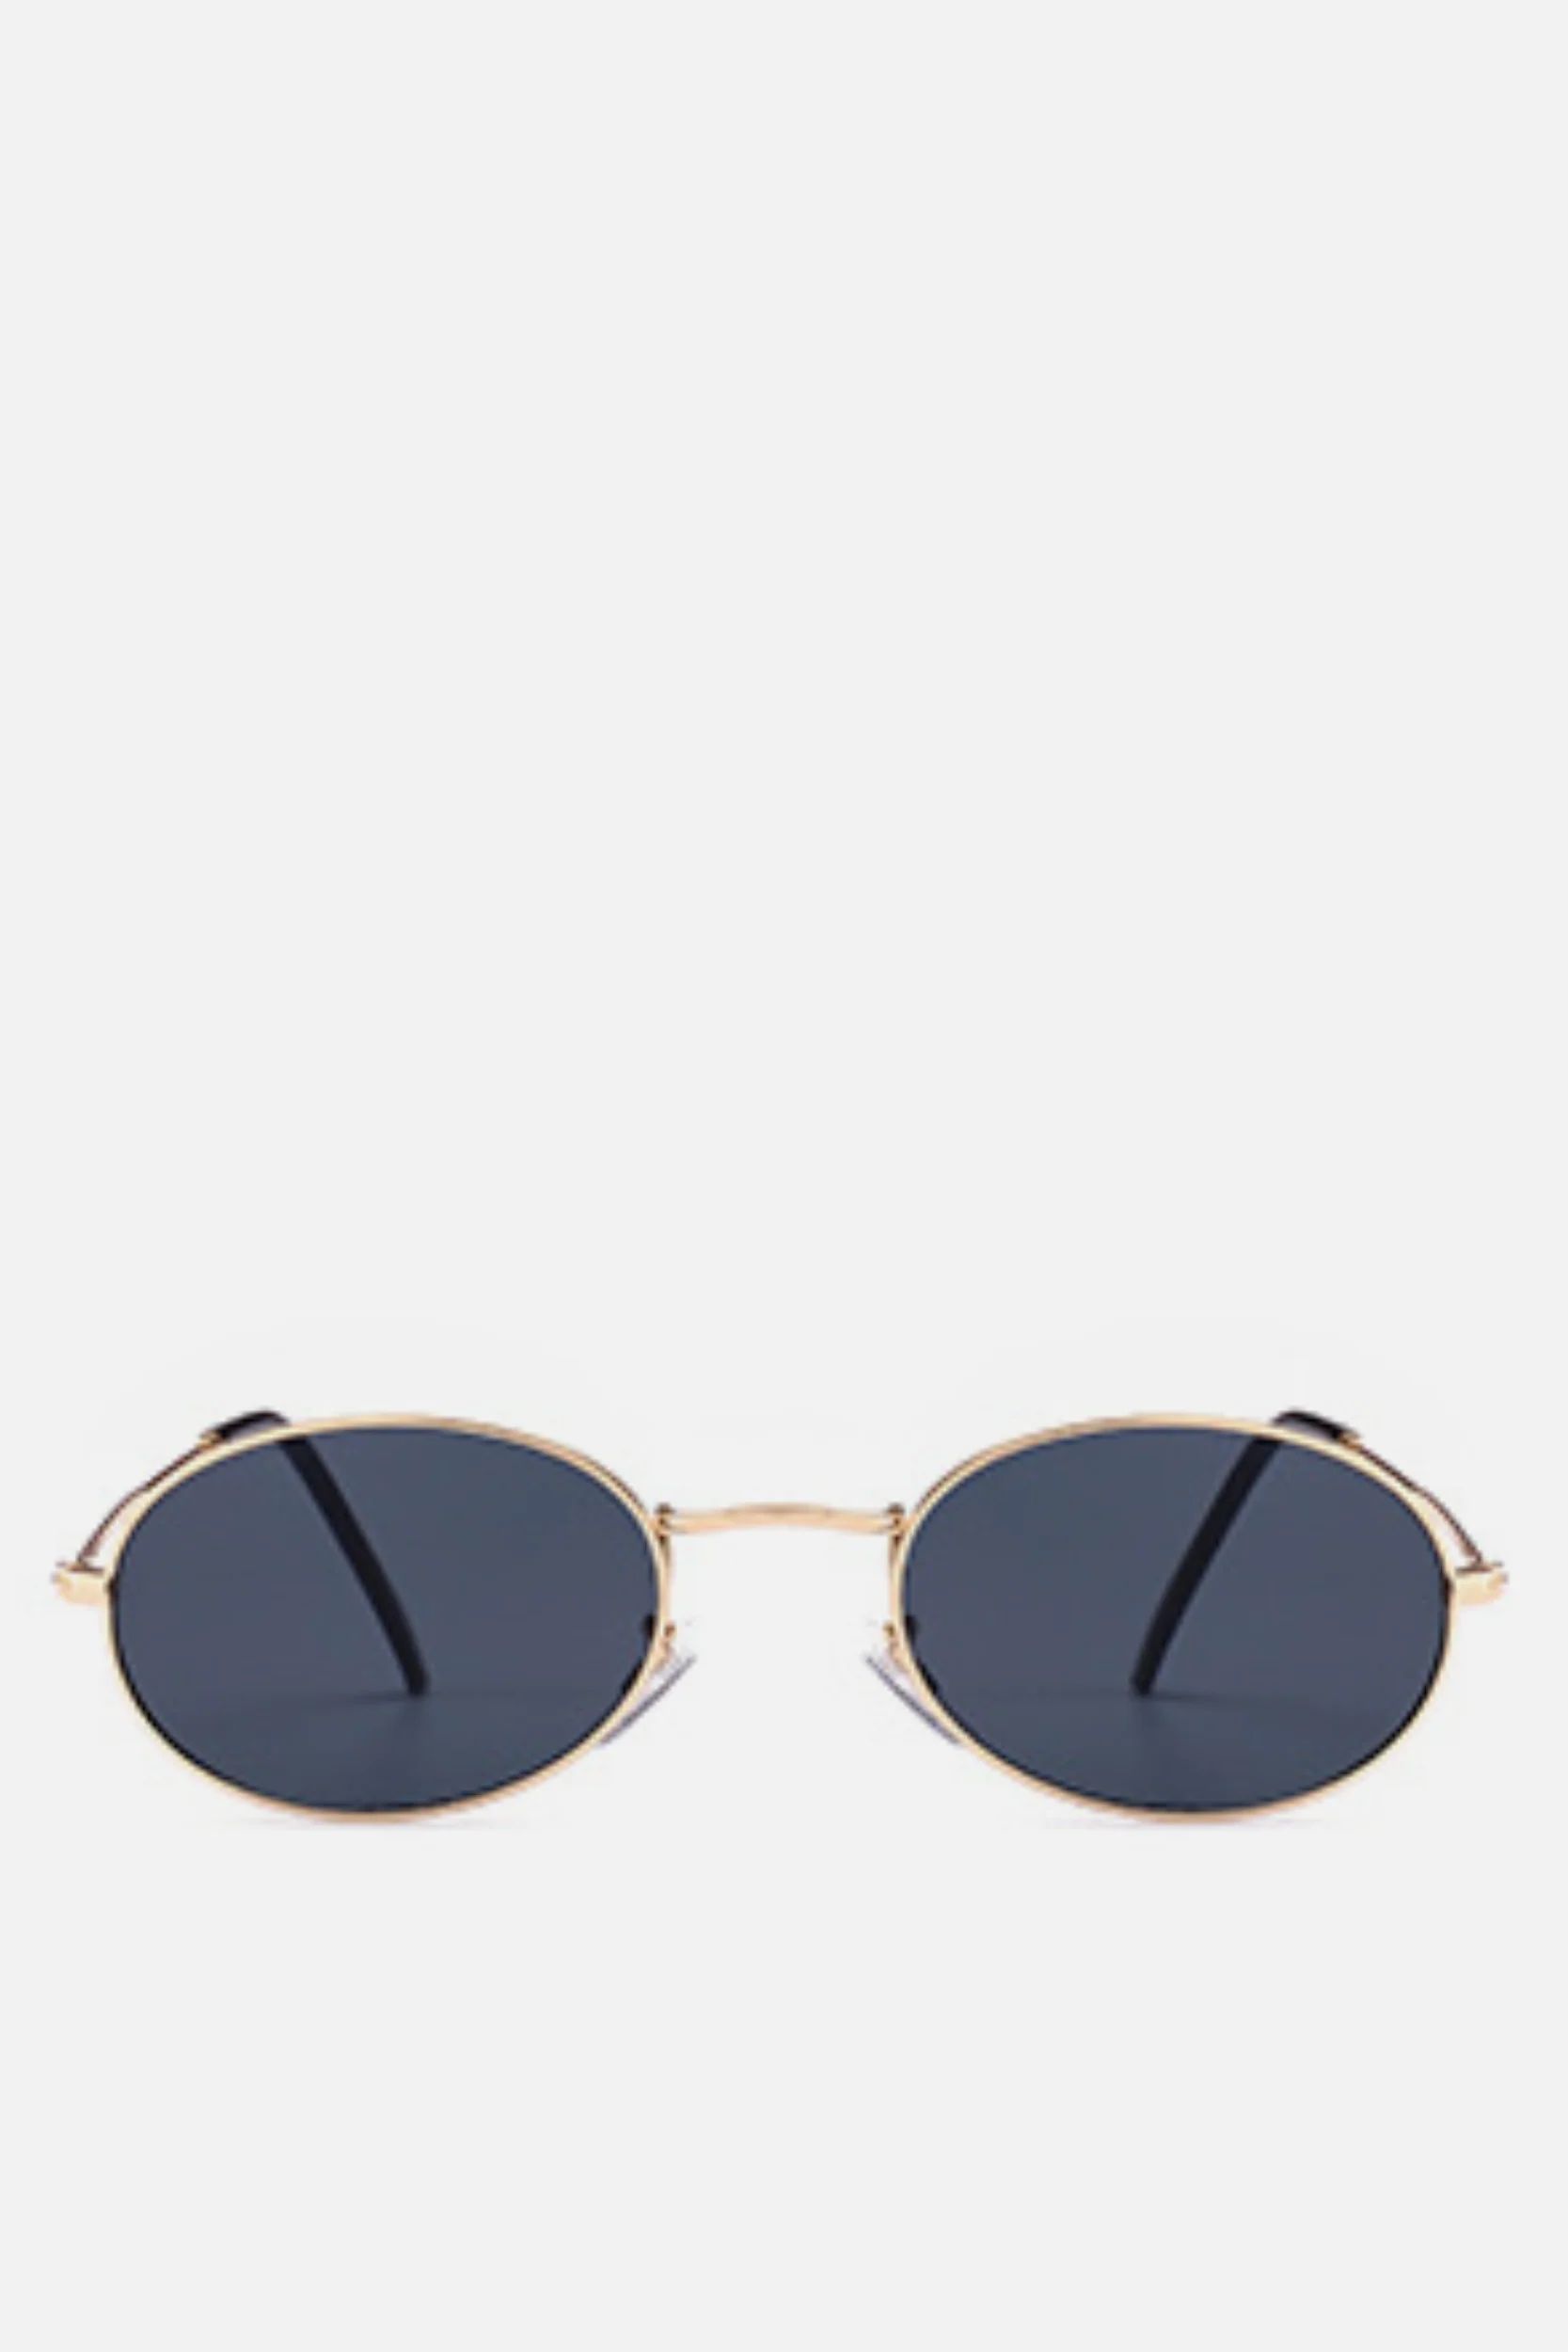 FIJI Black Oval Sunglasses | Noughts and Kisses